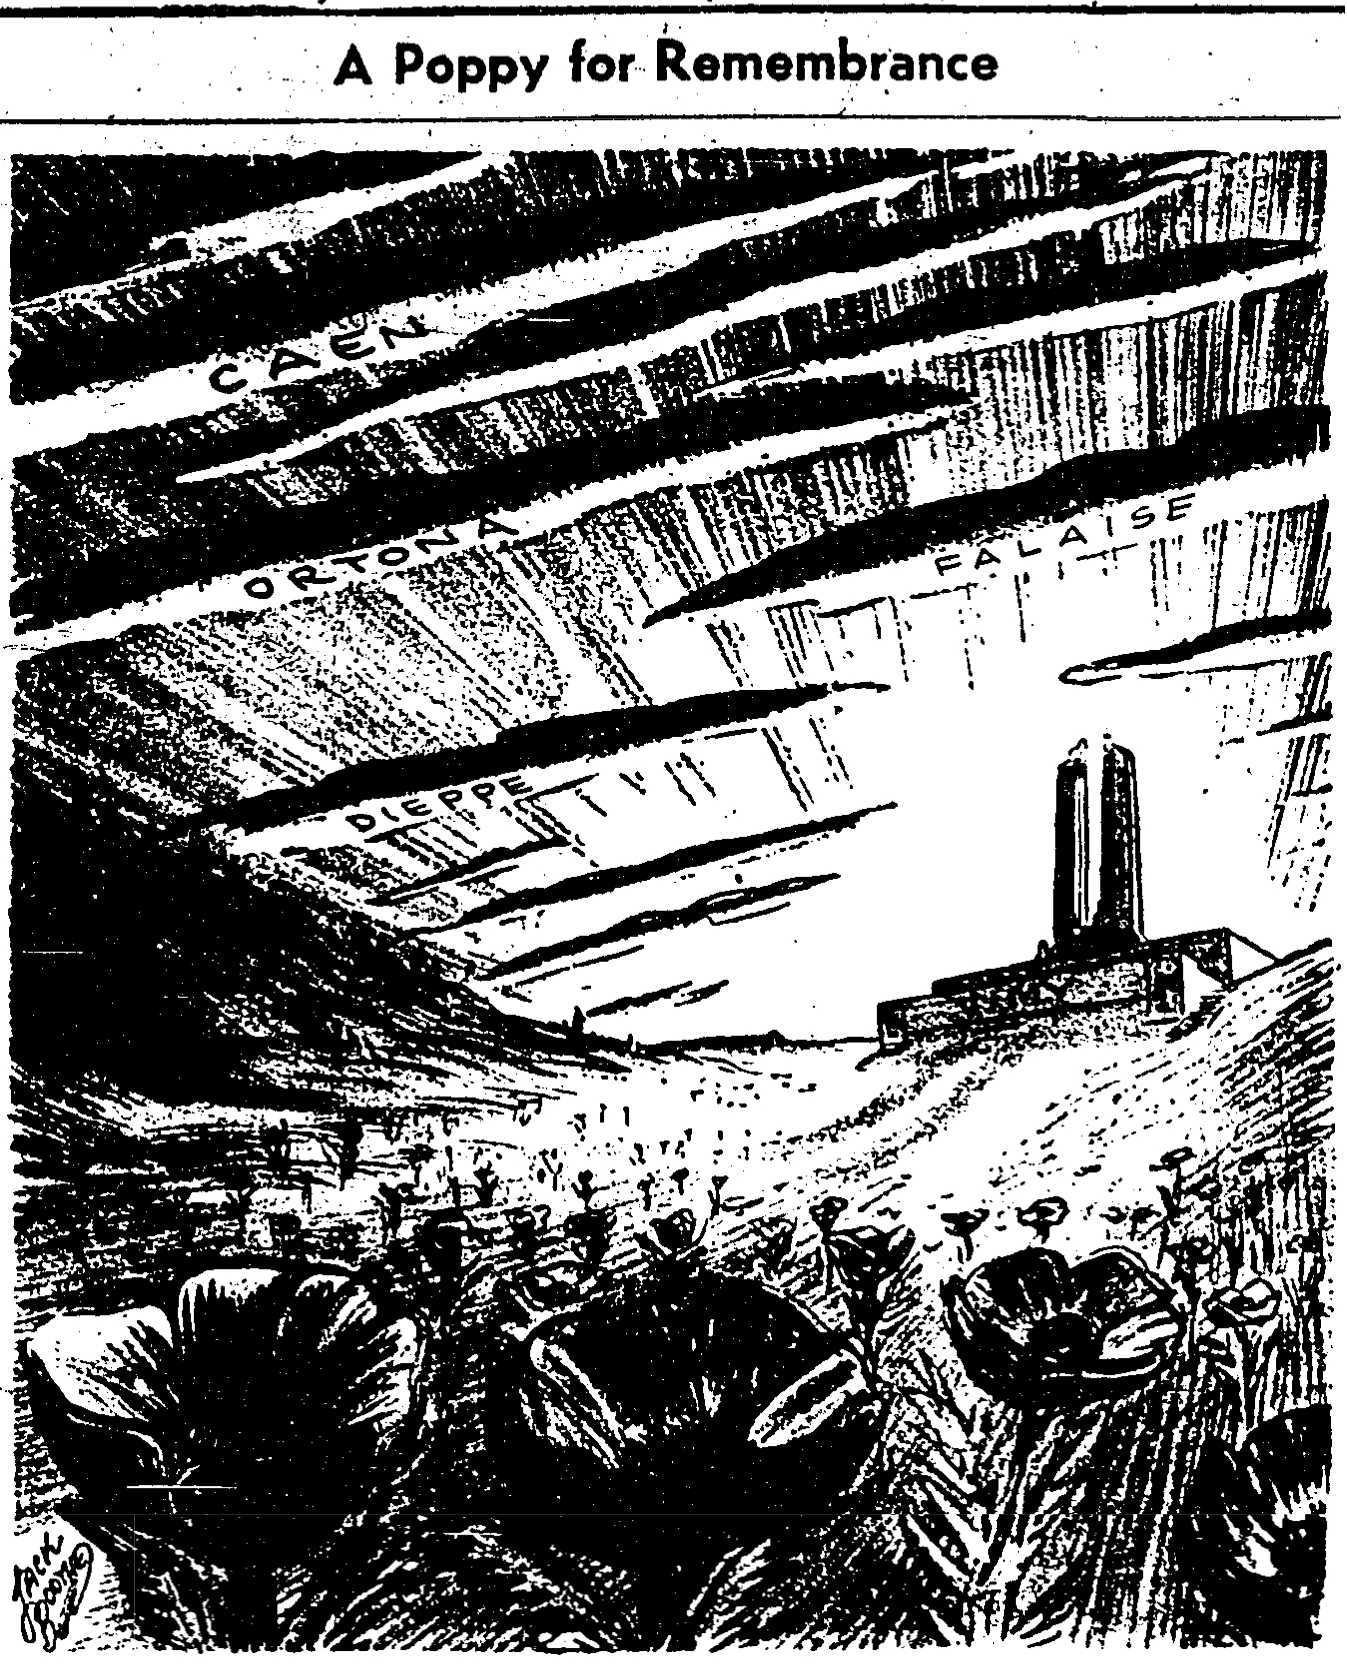 A black and white newspaper illustration.  The Vimy Memorial is framed by bright light; the clouds in the sky around it contain names of notable Second World War battles. Poppies cover the ground.